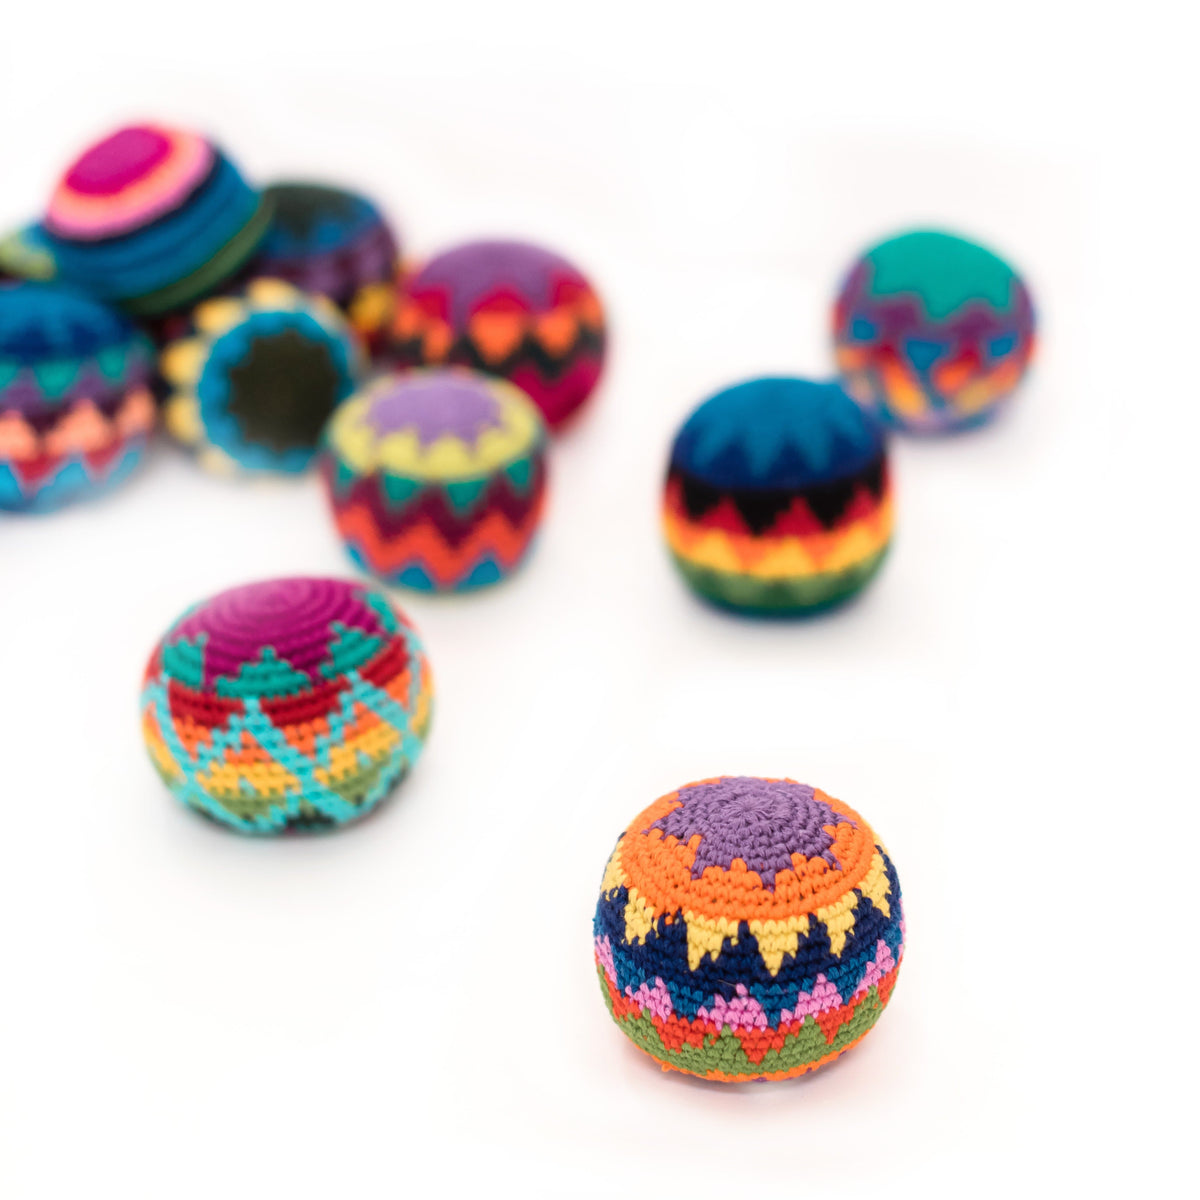 Group of Fair Trade Colorful Hacky Sack